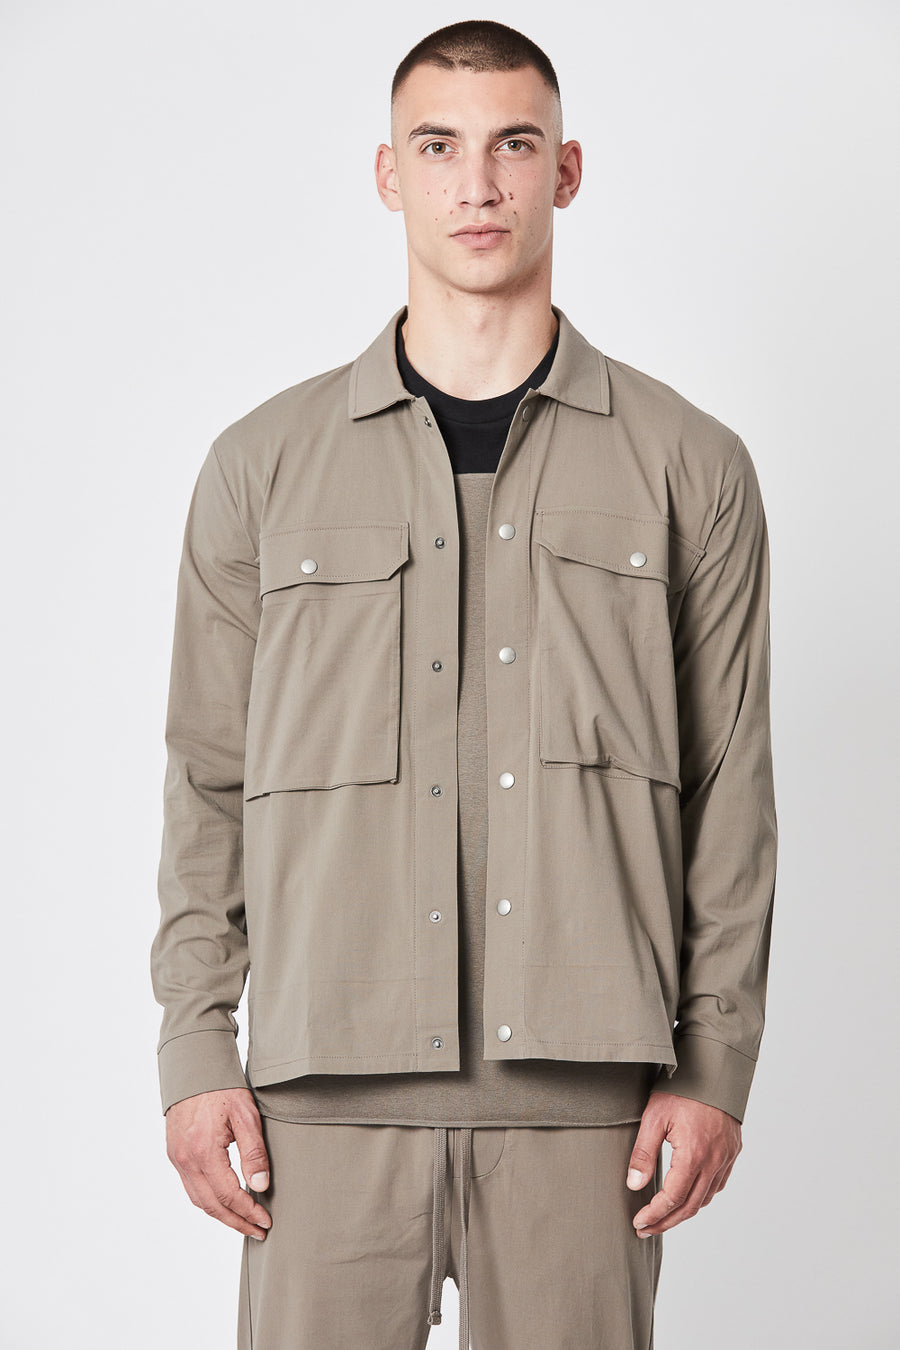 Buy the Thom Krom M SJ 600 Overshirt in Fossil at Intro. Spend £50 for free UK delivery. Official stockists. We ship worldwide.